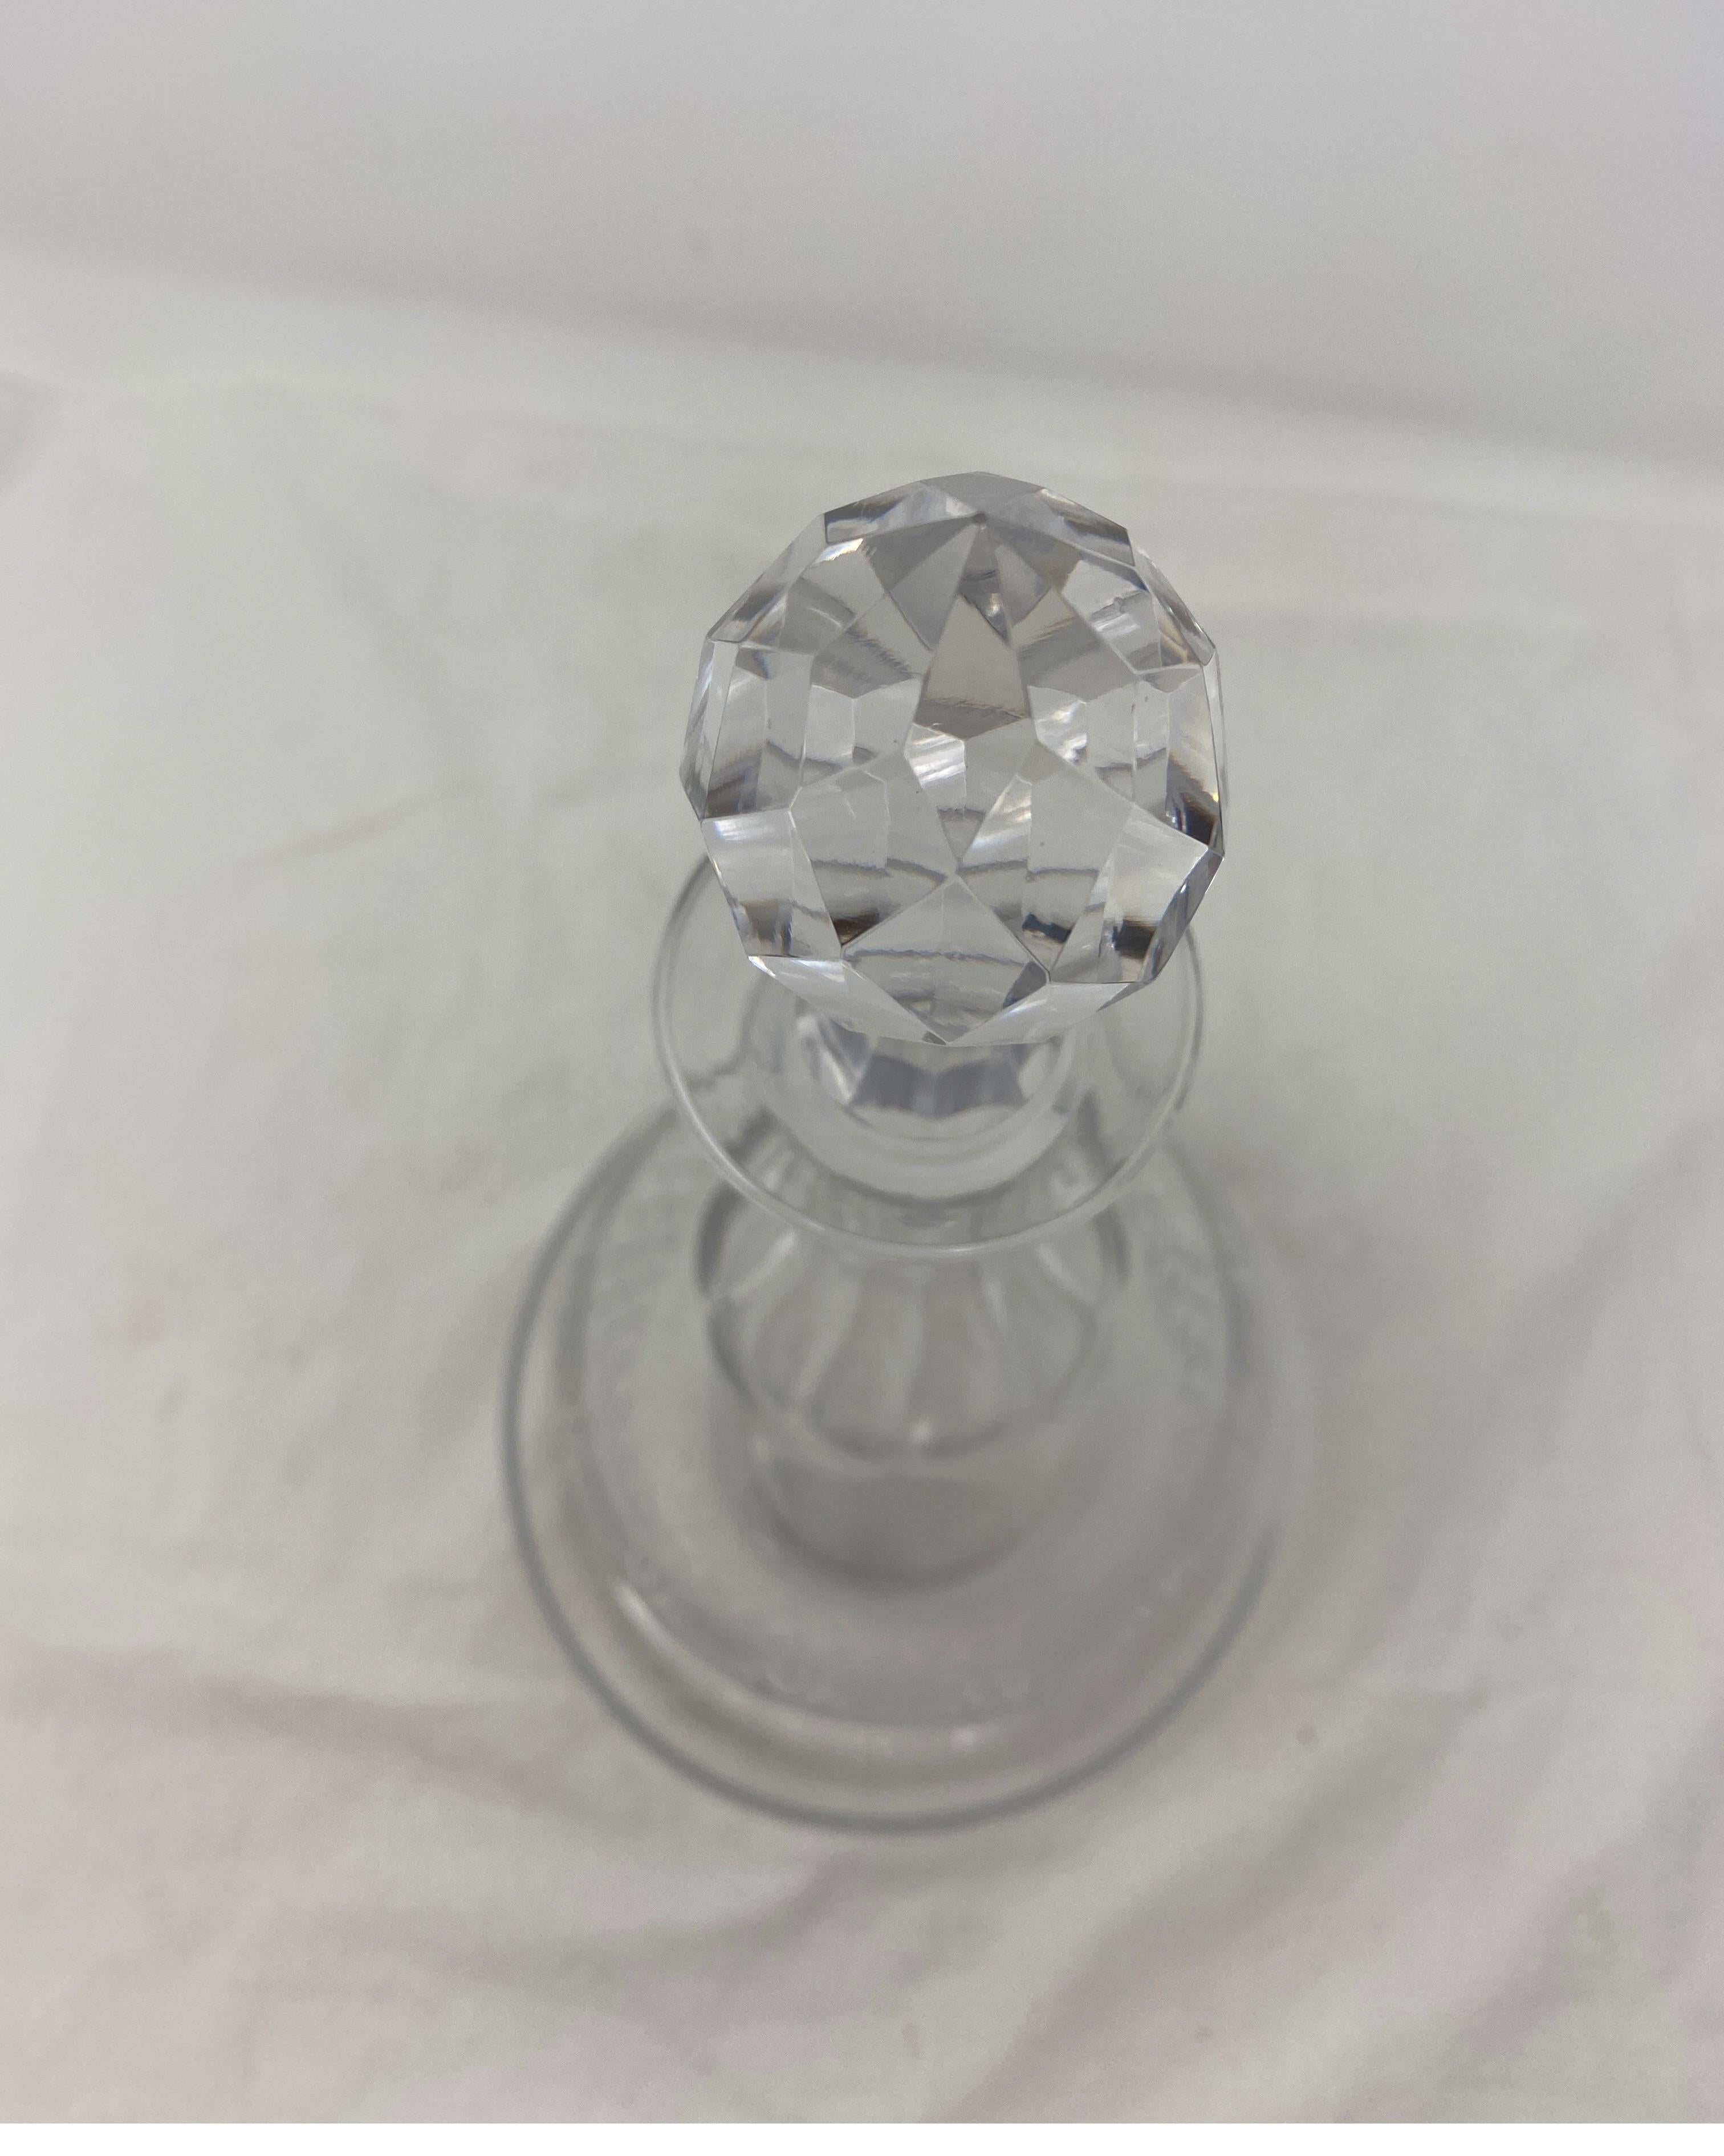 Antique Baccarat Carafe with Coaster In Good Condition For Sale In Houston, TX